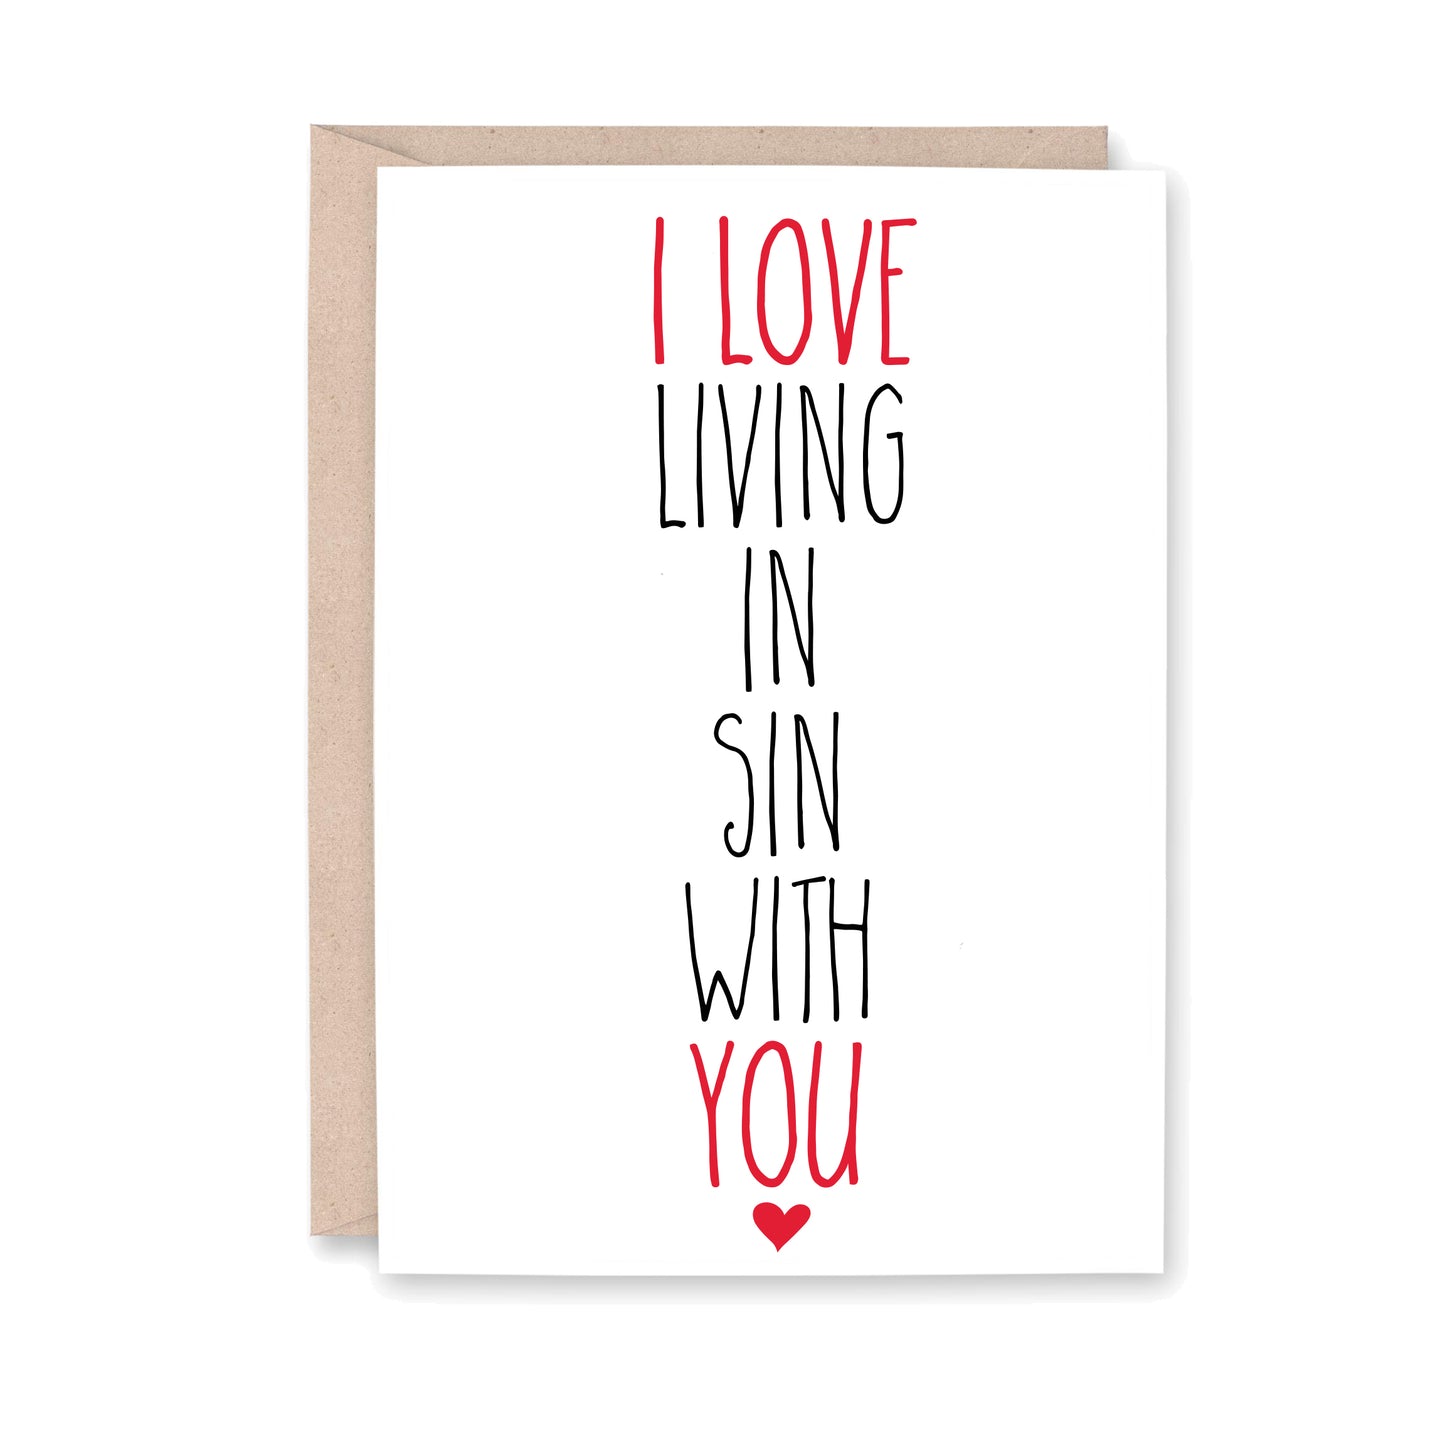 I love living in sin with you